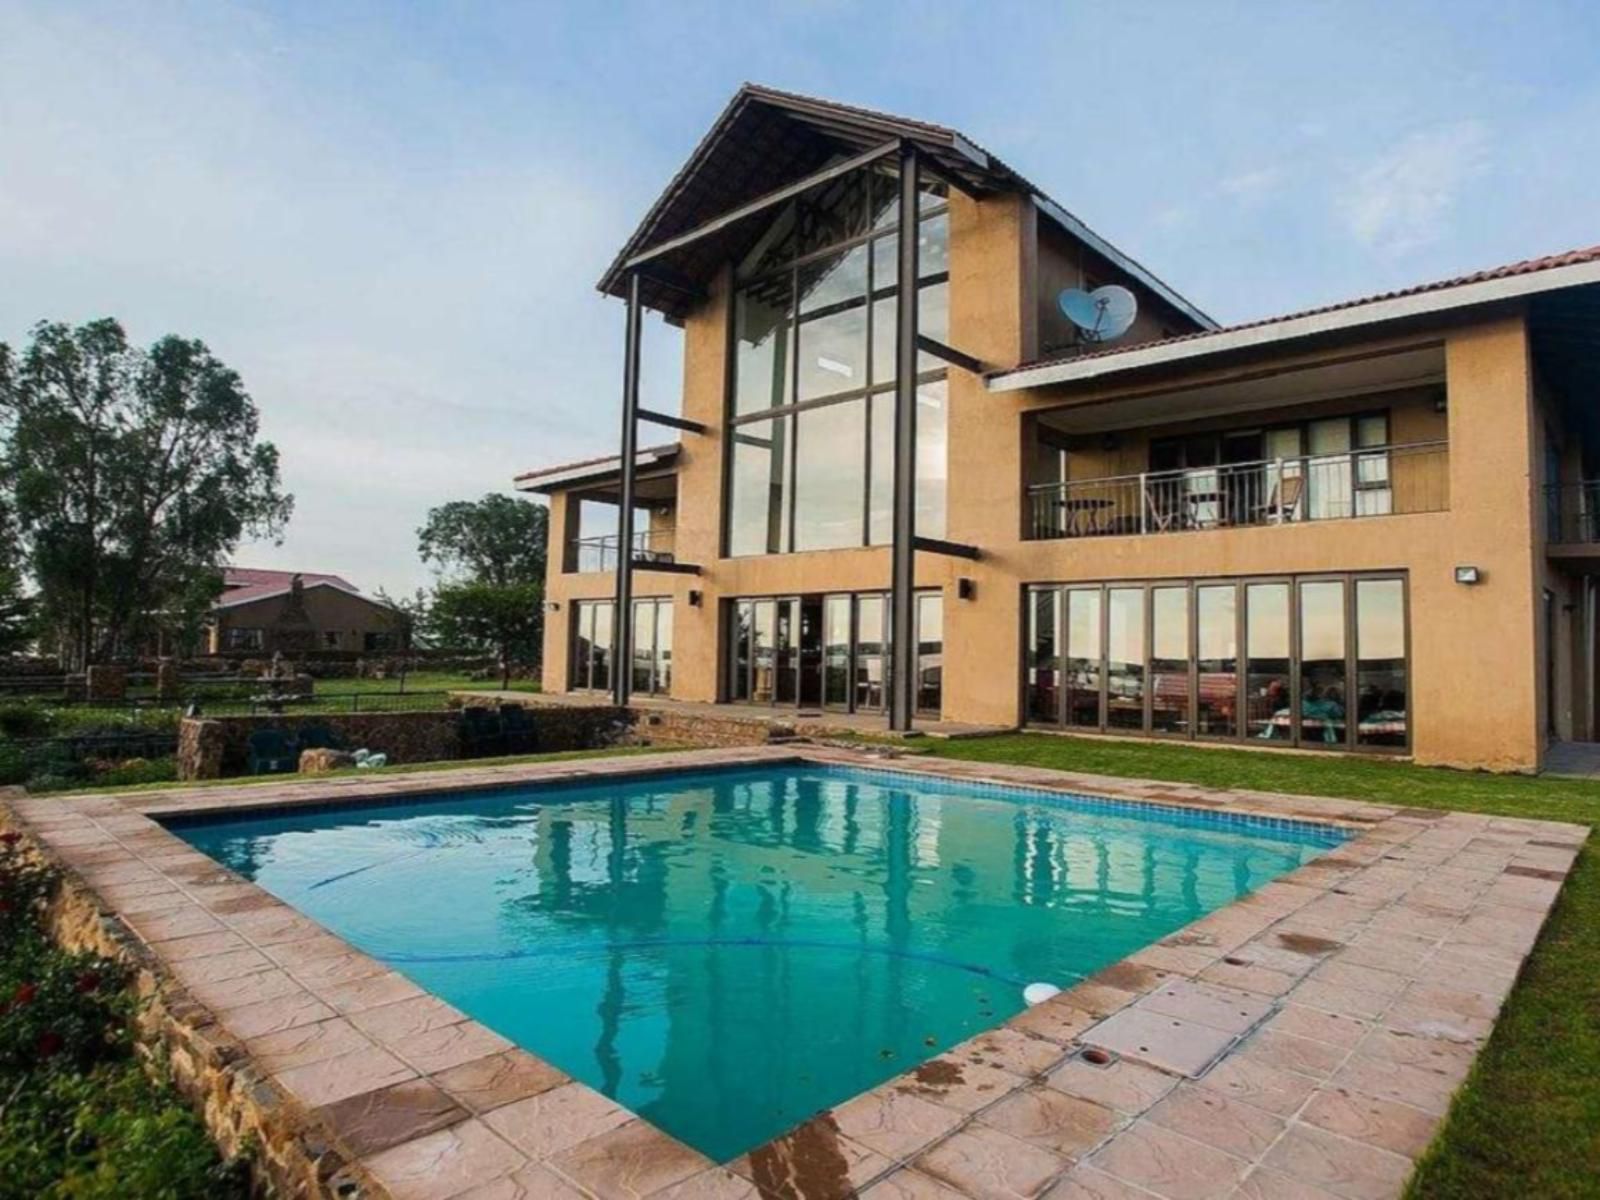 R New At Vaal Estate Vaal Dam Gauteng South Africa Complementary Colors, House, Building, Architecture, Swimming Pool